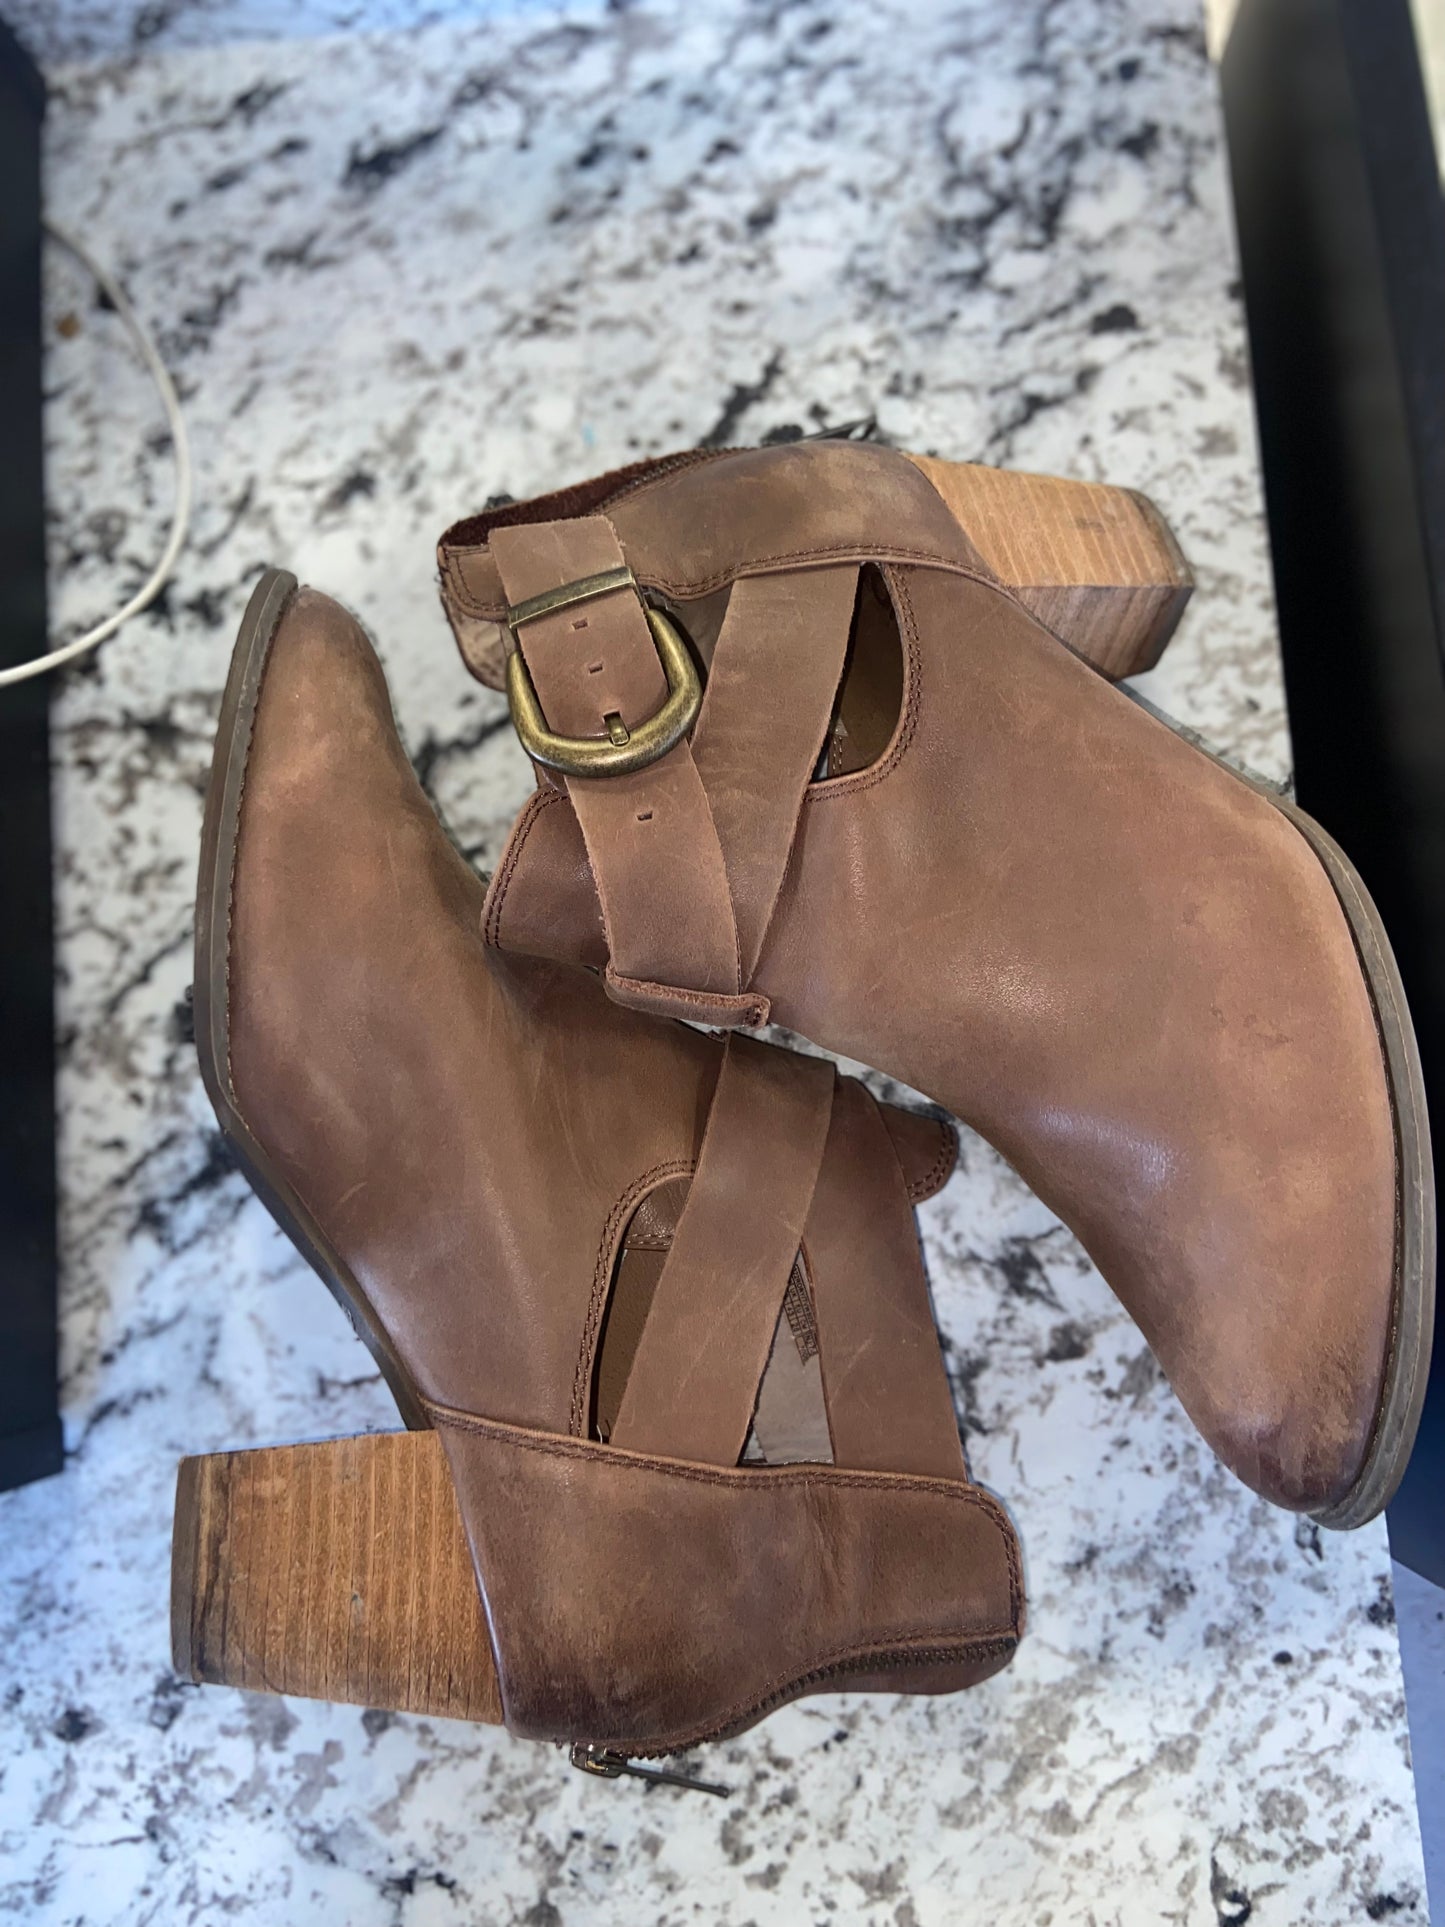 Vionic Rory Brown Leather Booties (Size 11)